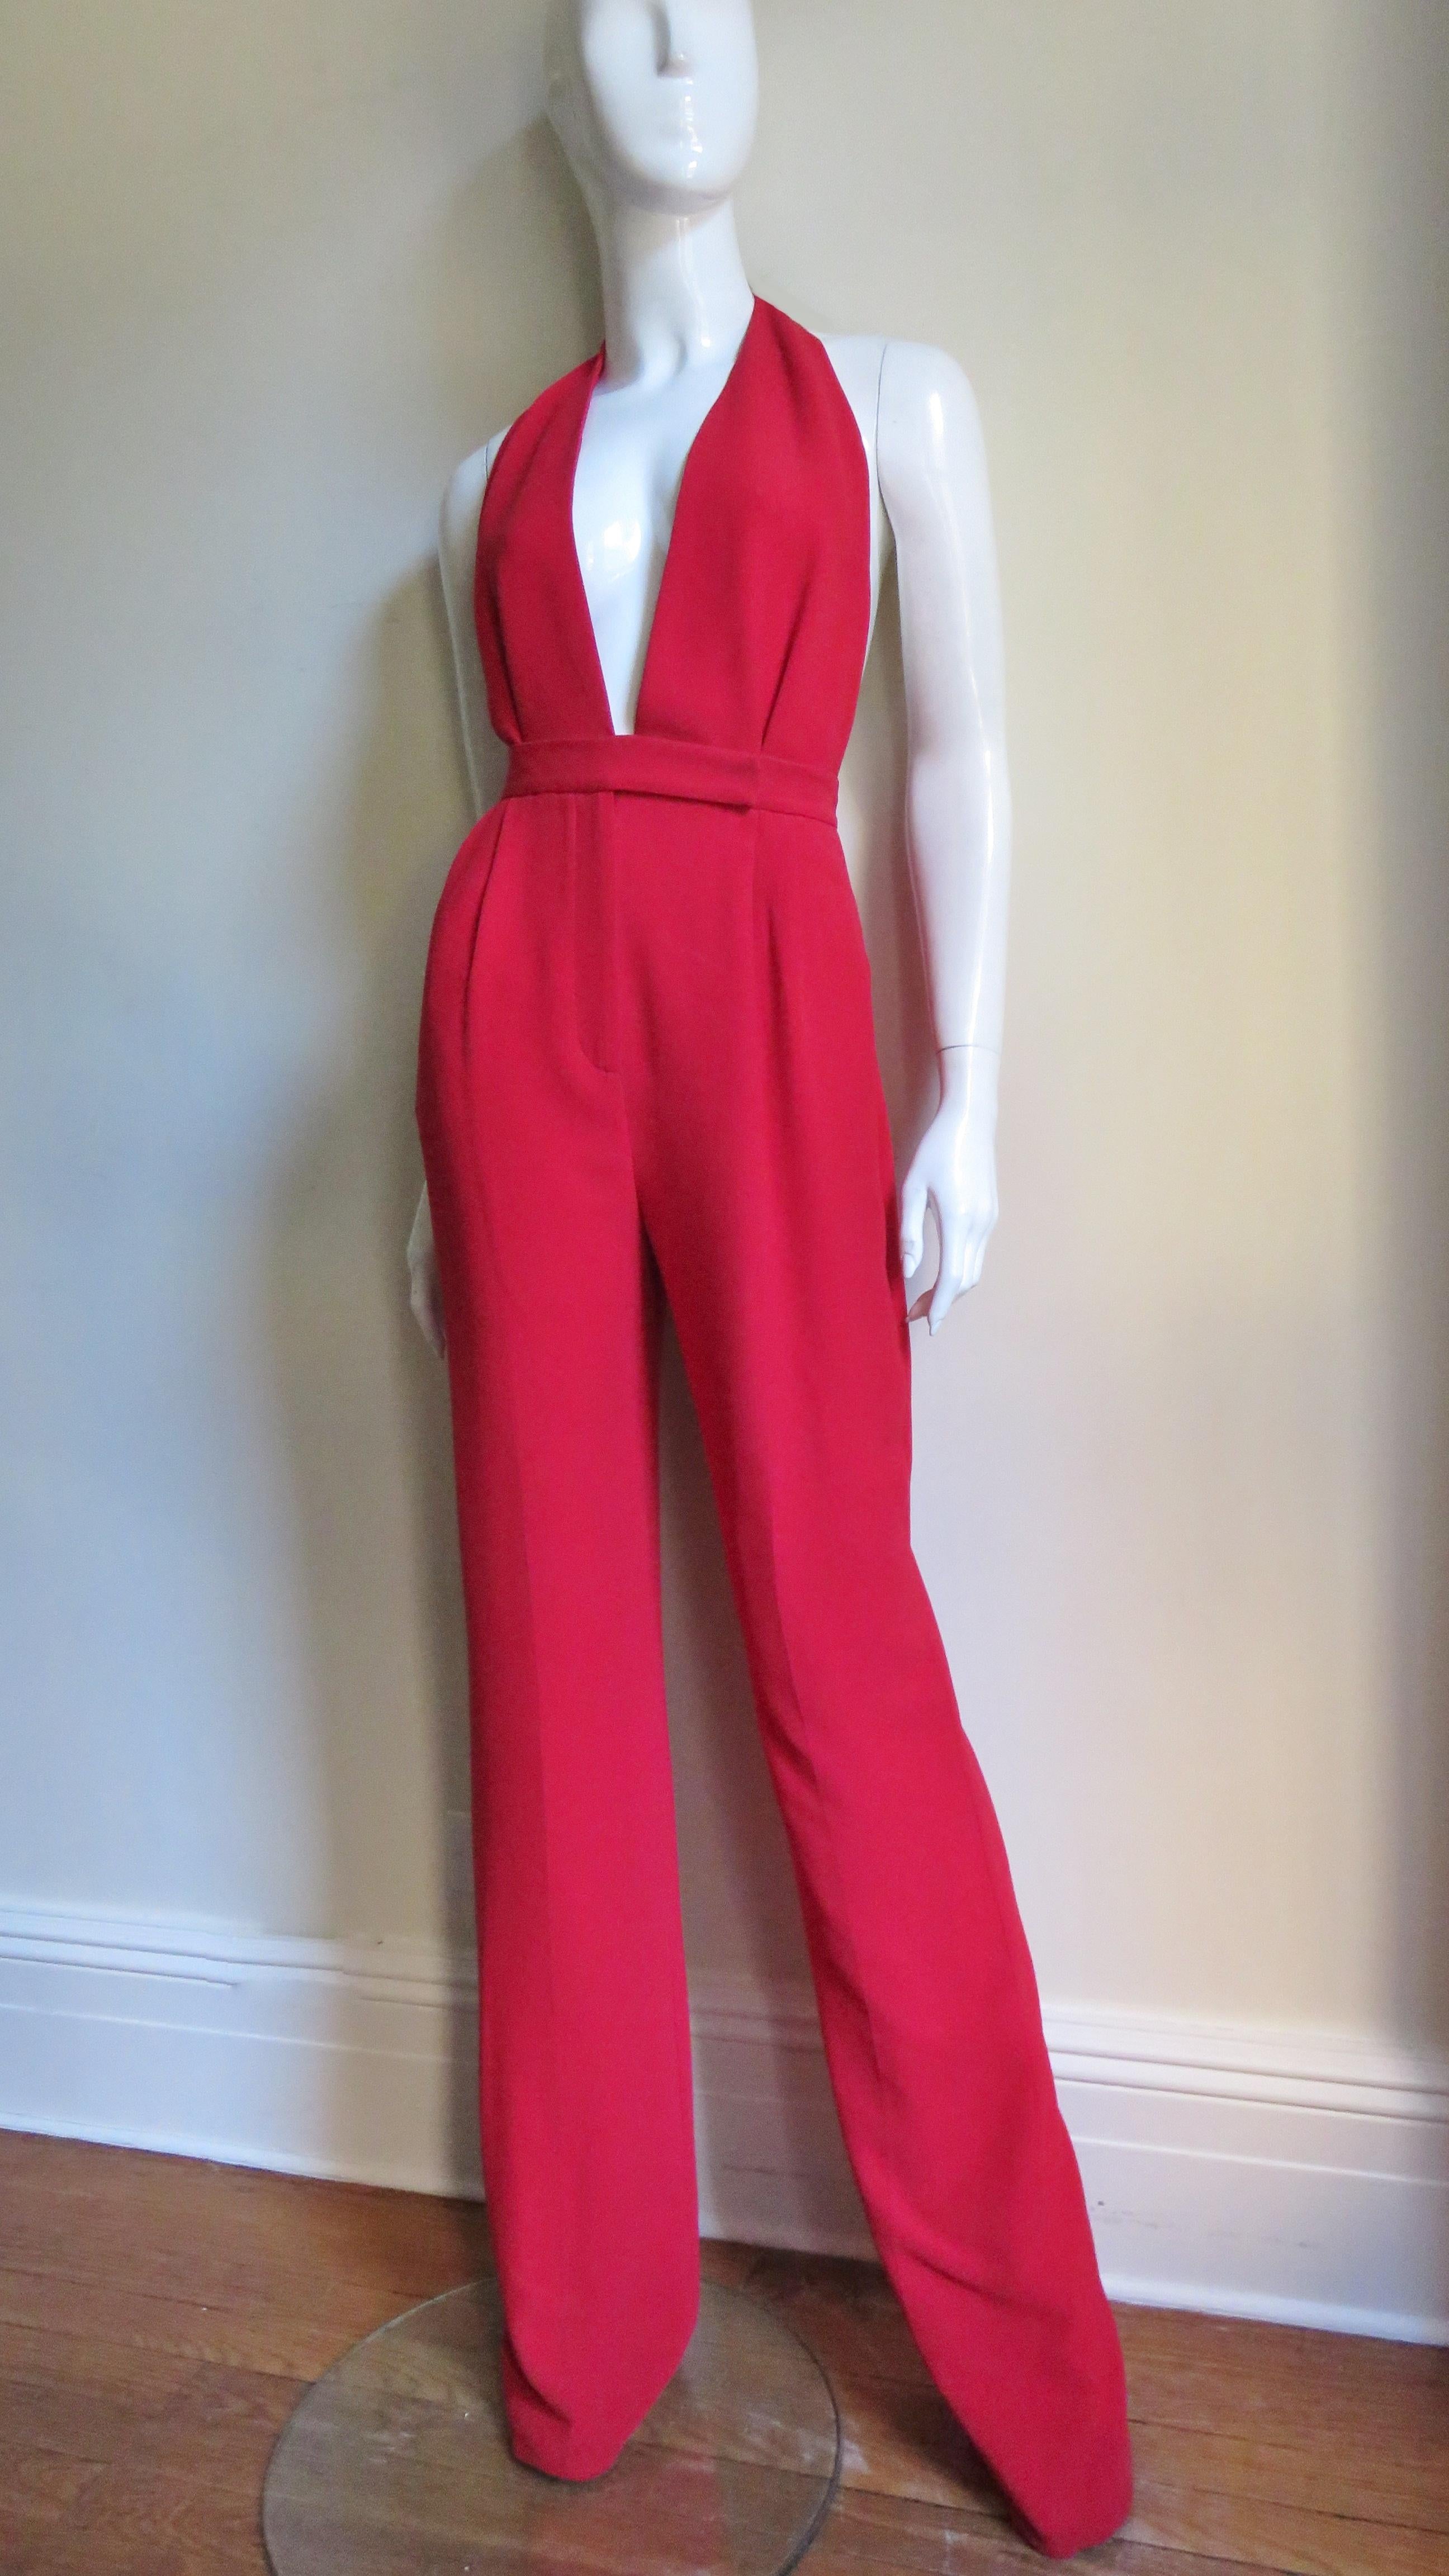 An incredible red silk jumpsuit from Valentino.  It is halter style with a plunging neckline to the waist.  The bodice has 2 front tucks as do the pants at the waistband that joins them.  The legs are full.  The jumpsuit has side seam hip and back